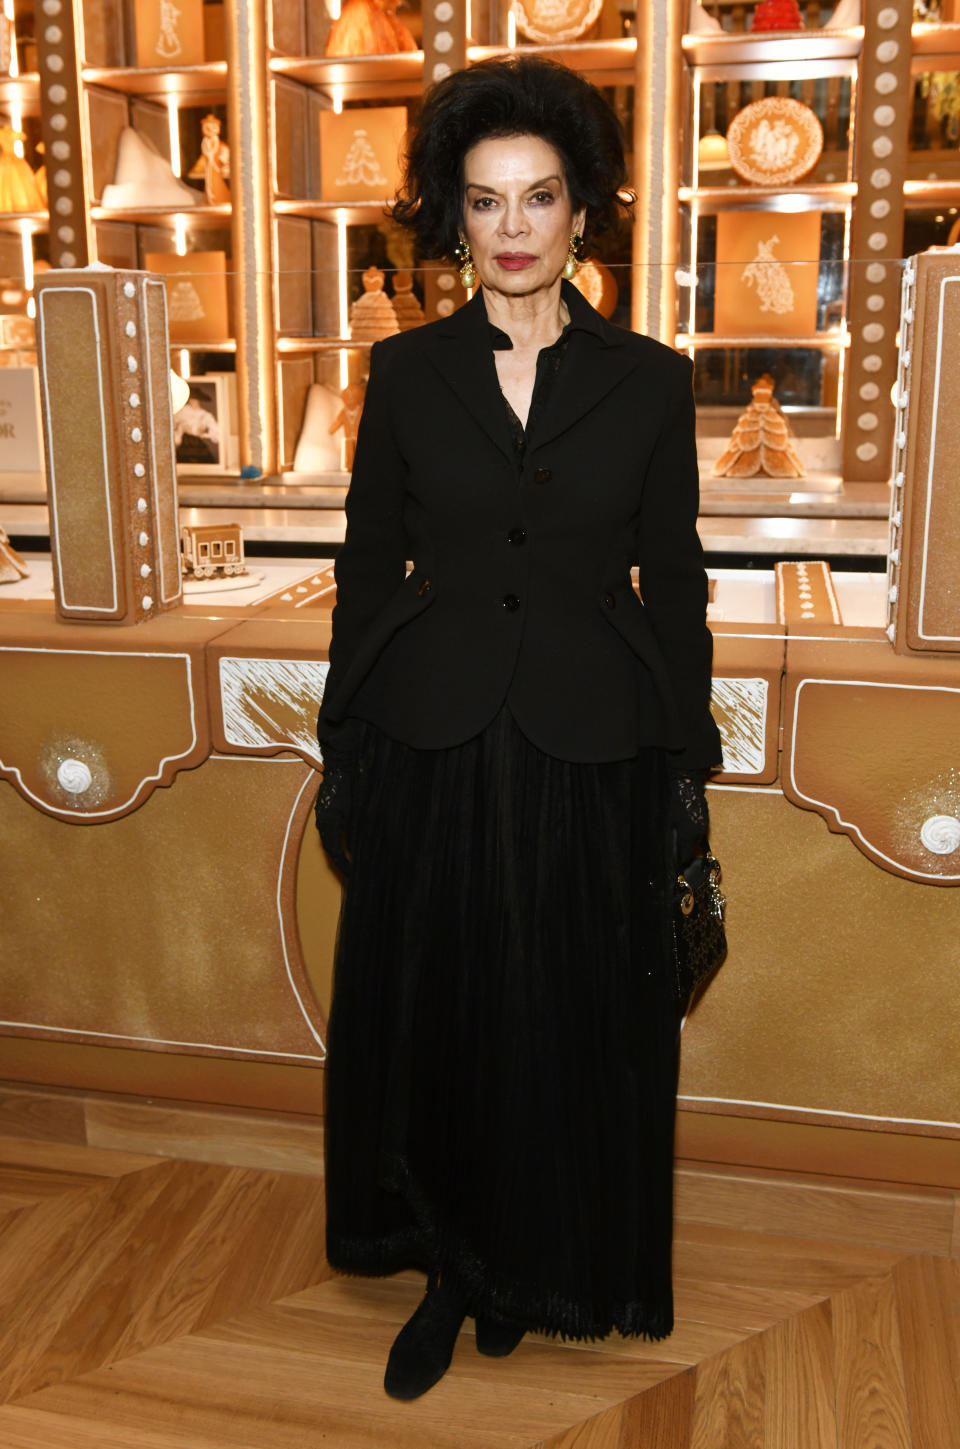 LONDON, ENGLAND - NOVEMBER 10: Bianca Jagger celebrates the opening of The Fabulous World of Dior at Harrods on November 10, 2022 in London, England. Pic Credit: Dave Benett